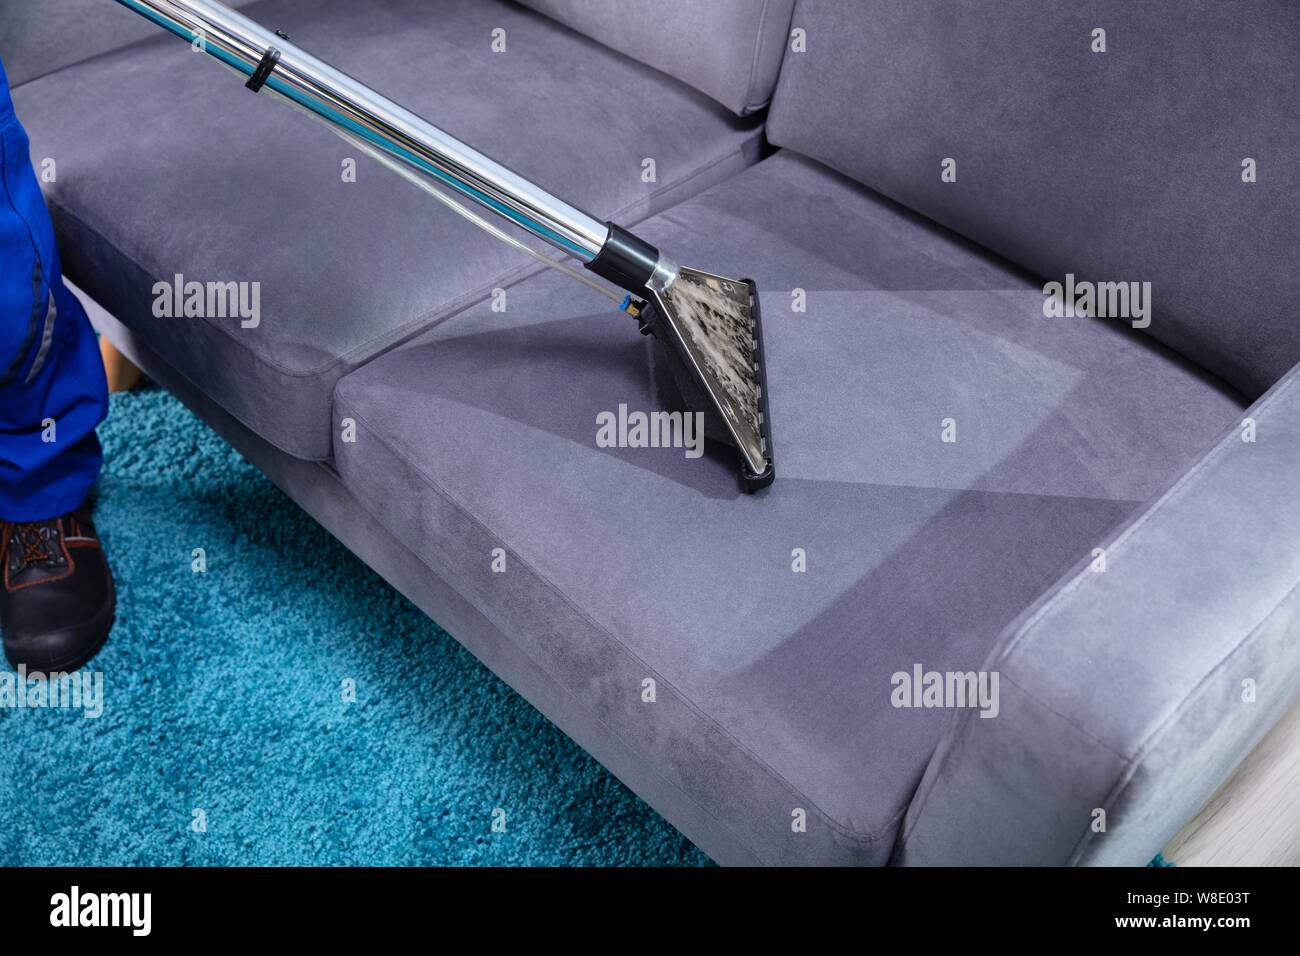 Photo Of Person Cleaning Sofa With Vacuum Cleaner Stock Photo